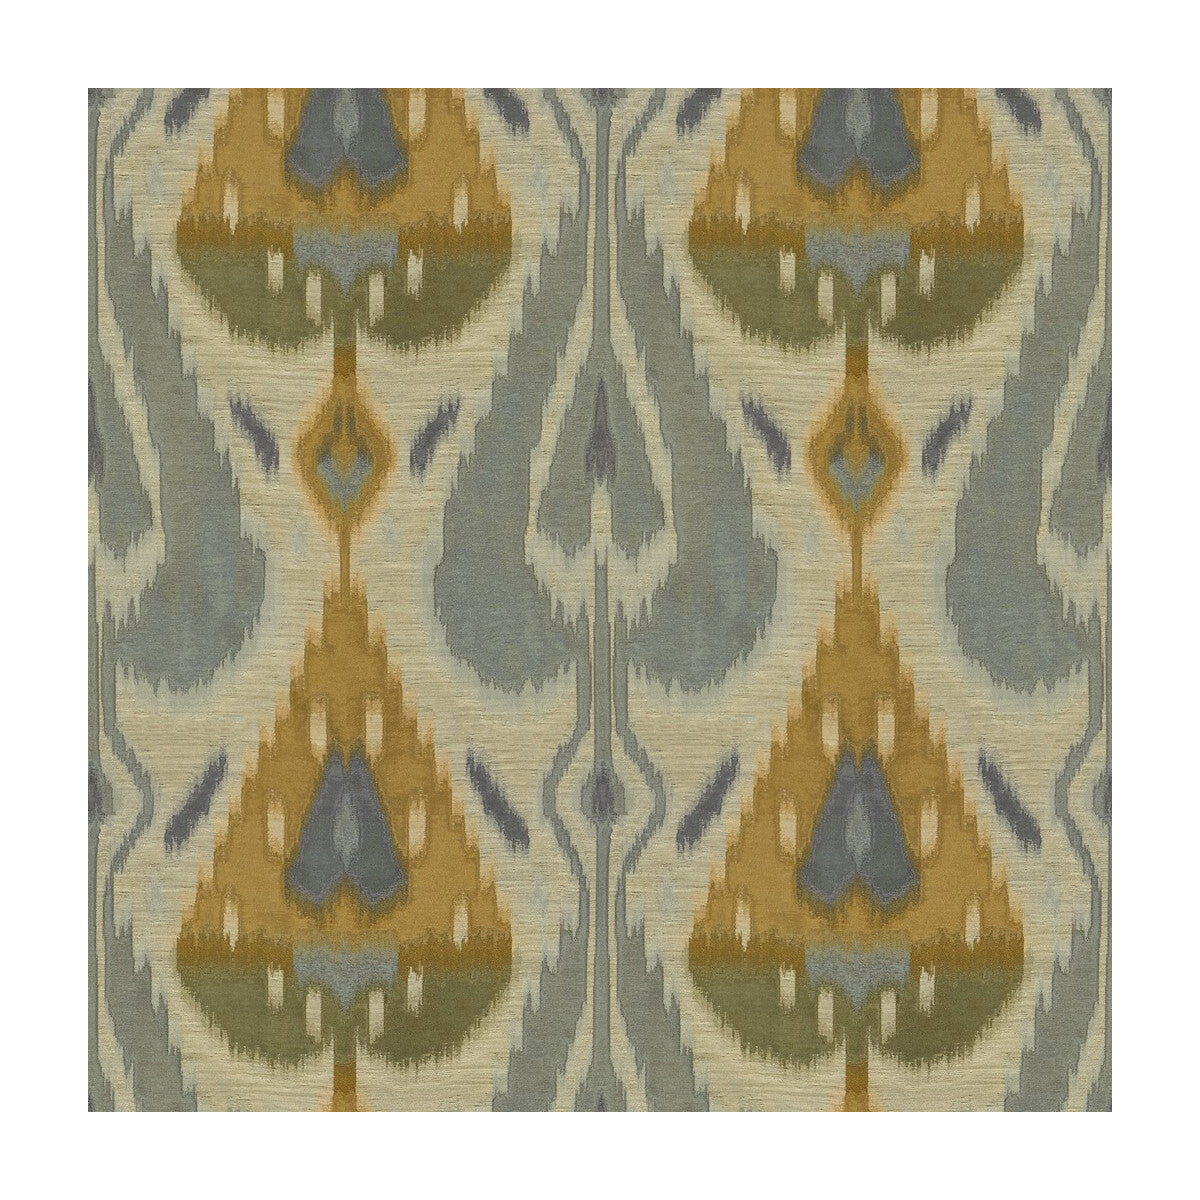 Ikat Chic fabric in quarry color - pattern 33970.5.0 - by Kravet Couture in the Modern Luxe II collection